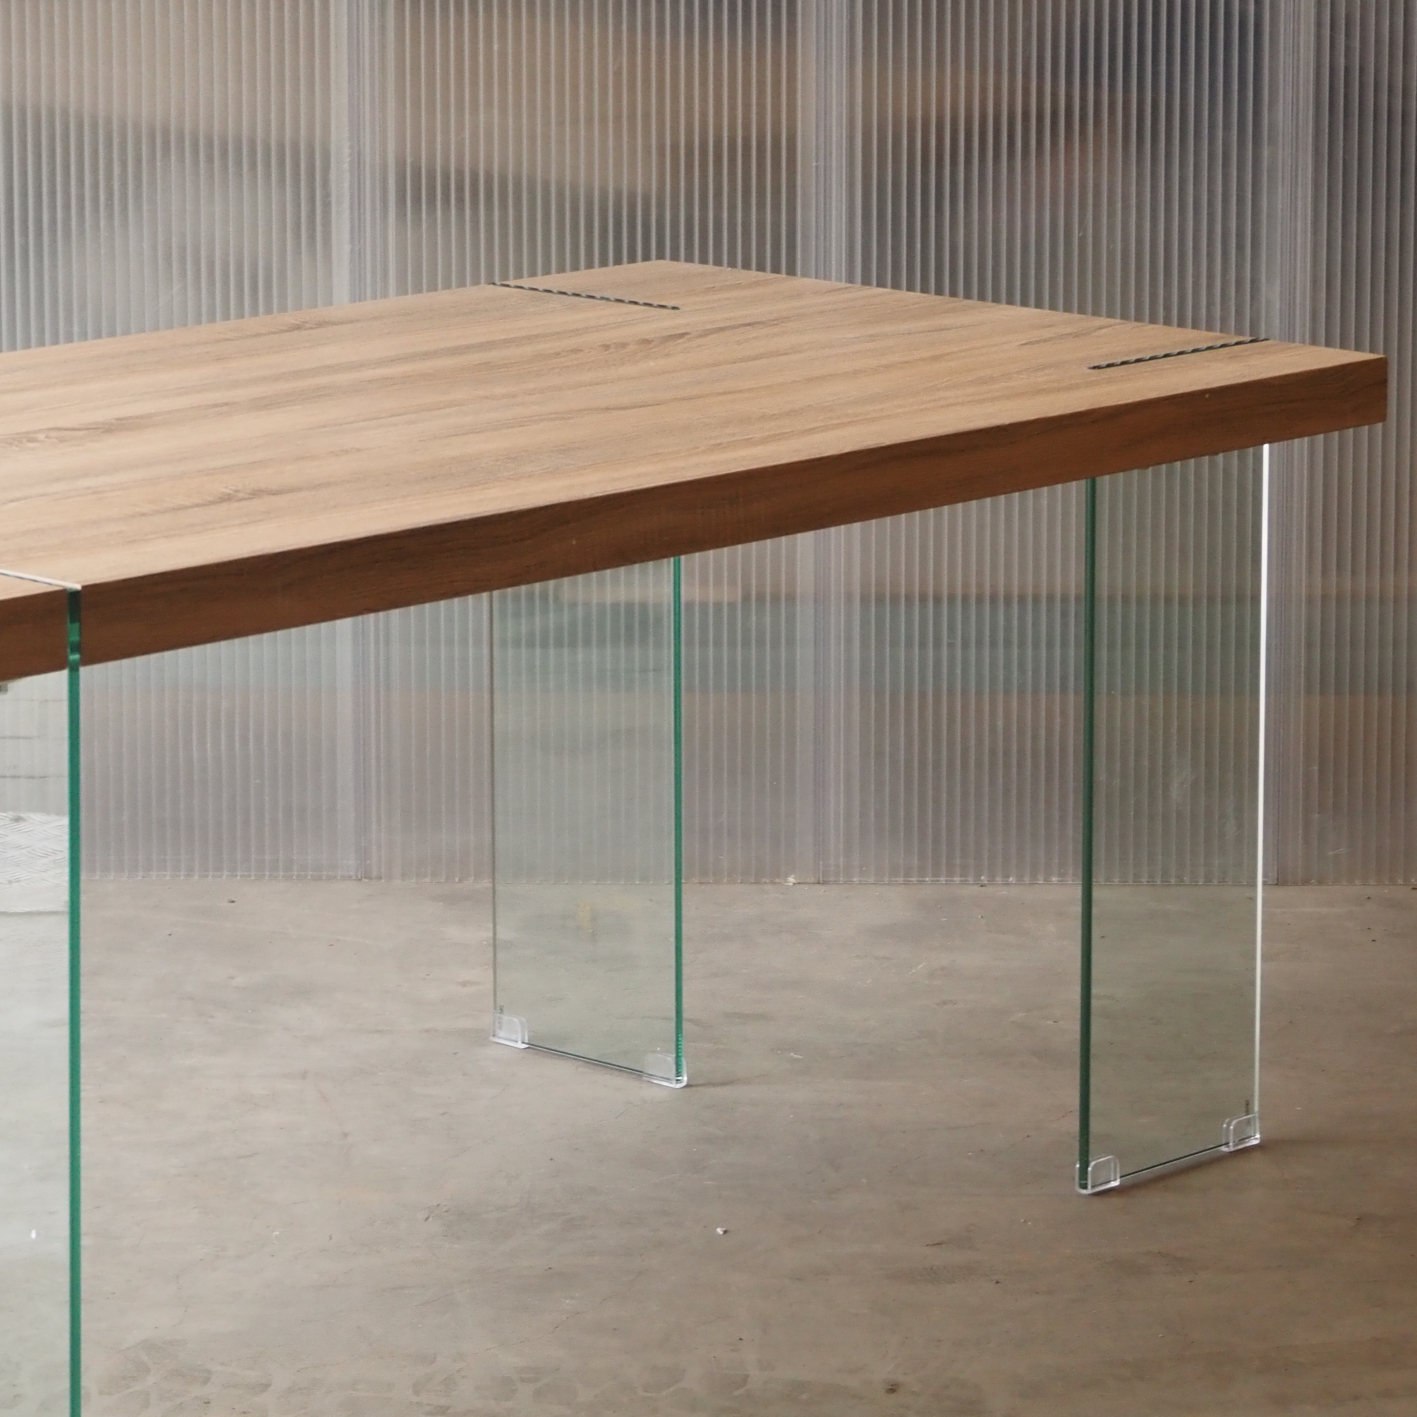 Table 'Waver' by Tomasucci